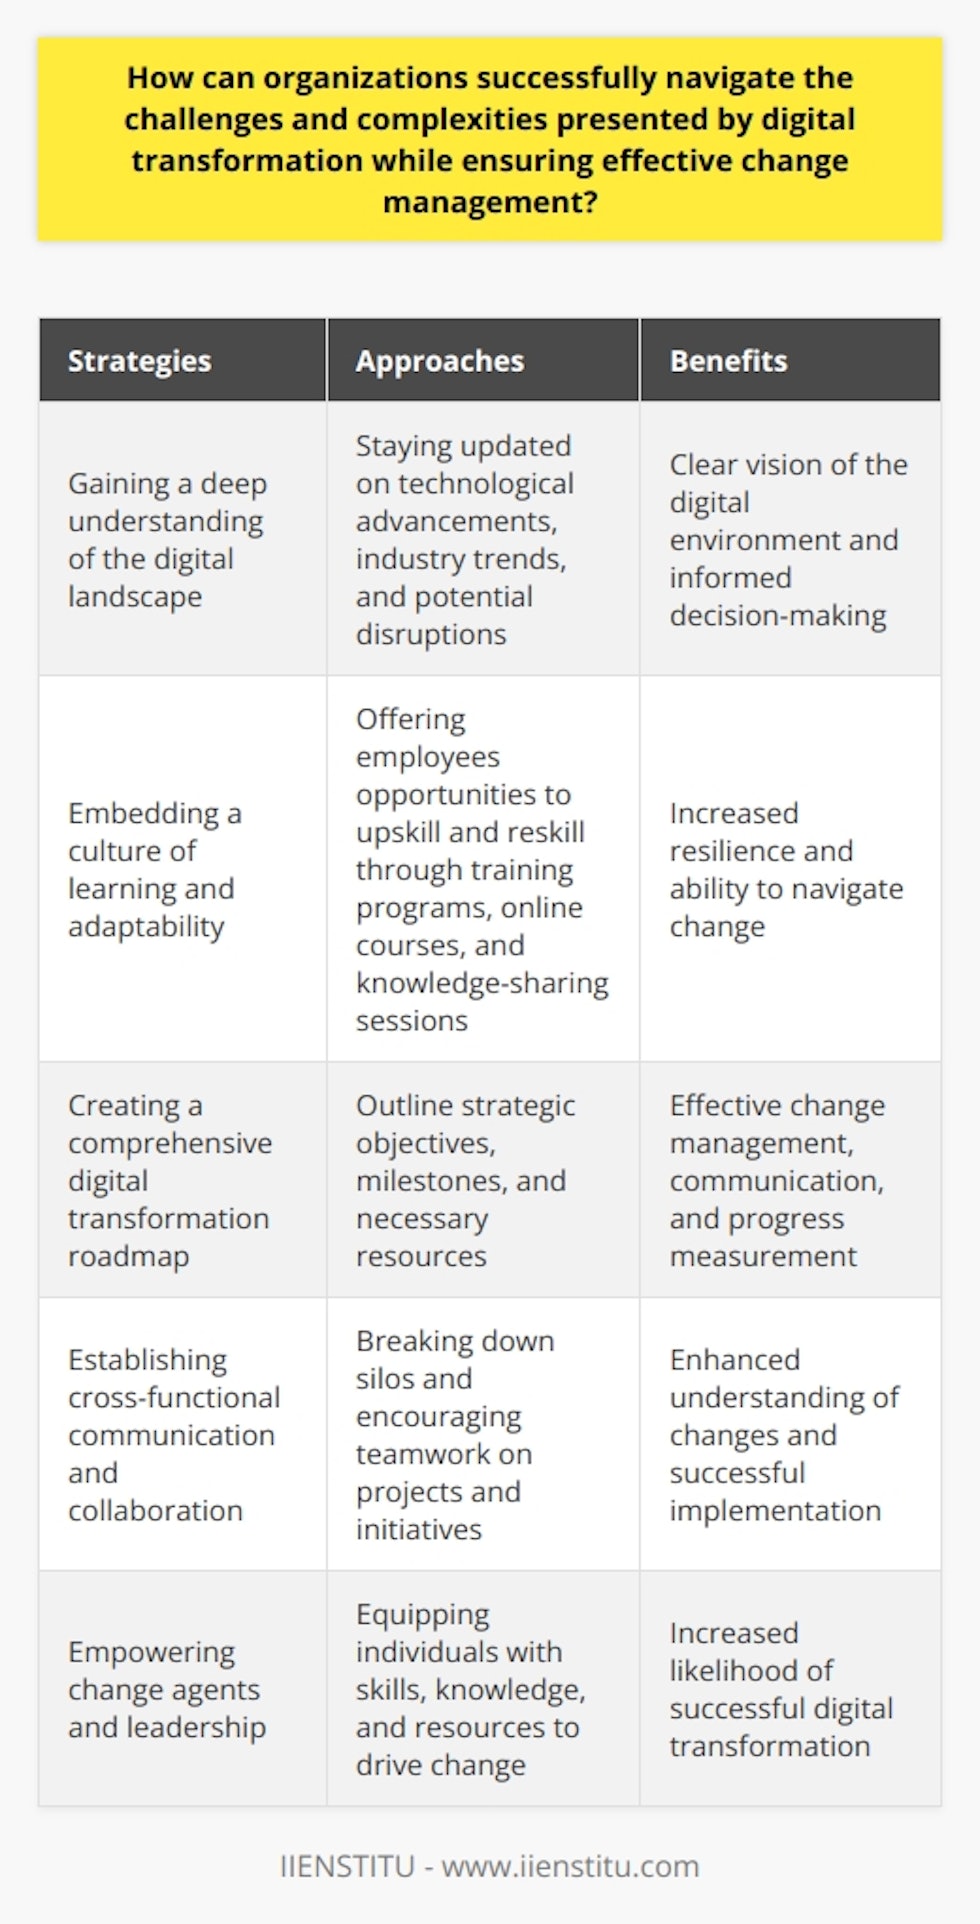 Digital transformation is a complex process that presents numerous challenges to organizations. However, by following certain strategies and approaches, organizations can navigate these challenges successfully while ensuring effective change management.The first step in this process is gaining a deep understanding of the digital landscape. This involves staying updated on technological advancements, industry trends, and potential disruptions that could impact the organization's operations. Actively participating in knowledge exchange forums, attending industry conferences, and engaging with experts can help organizations develop a clear vision of the digital environment and make informed decisions.Another crucial aspect is embedding a culture of learning and adaptability within the organization. As digital transformation progresses rapidly, organizations need to offer their employees opportunities to upskill and reskill through training programs, online courses, and knowledge-sharing sessions. Encouraging a growth mindset and embracing a culture of innovation will also contribute to the organization's resilience in the face of change.Creating a comprehensive digital transformation roadmap is also essential. This roadmap should clearly outline the organization's strategic objectives, short-term and long-term milestones, and the necessary resources for implementing the digital initiatives. It serves as a valuable tool for managing change effectively, facilitating communication among stakeholders, and measuring progress.Establishing cross-functional communication and collaboration is another vital element. Breaking down silos and encouraging teams to work together on projects and initiatives will ensure effective change management during digital transformation. A unified vision and open lines of communication help everyone understand the rationale behind the changes and contribute to their successful implementation.Empowering change agents and leadership is the final key to successfully navigating digital transformation challenges. These individuals should have a clear understanding of the organization's strategic goals and possess the skills and knowledge necessary to drive change. By equipping these change agents with the right resources, organizations can increase the likelihood of a successful digital transformation journey.By understanding the digital landscape, embedding a culture of learning and adaptability, creating a comprehensive roadmap, establishing cross-functional communication and collaboration, and empowering change agents and leadership, organizations can successfully navigate the challenges presented by digital transformation while ensuring effective change management. These interrelated elements will help organizations adapt and thrive in the rapidly evolving digital world.